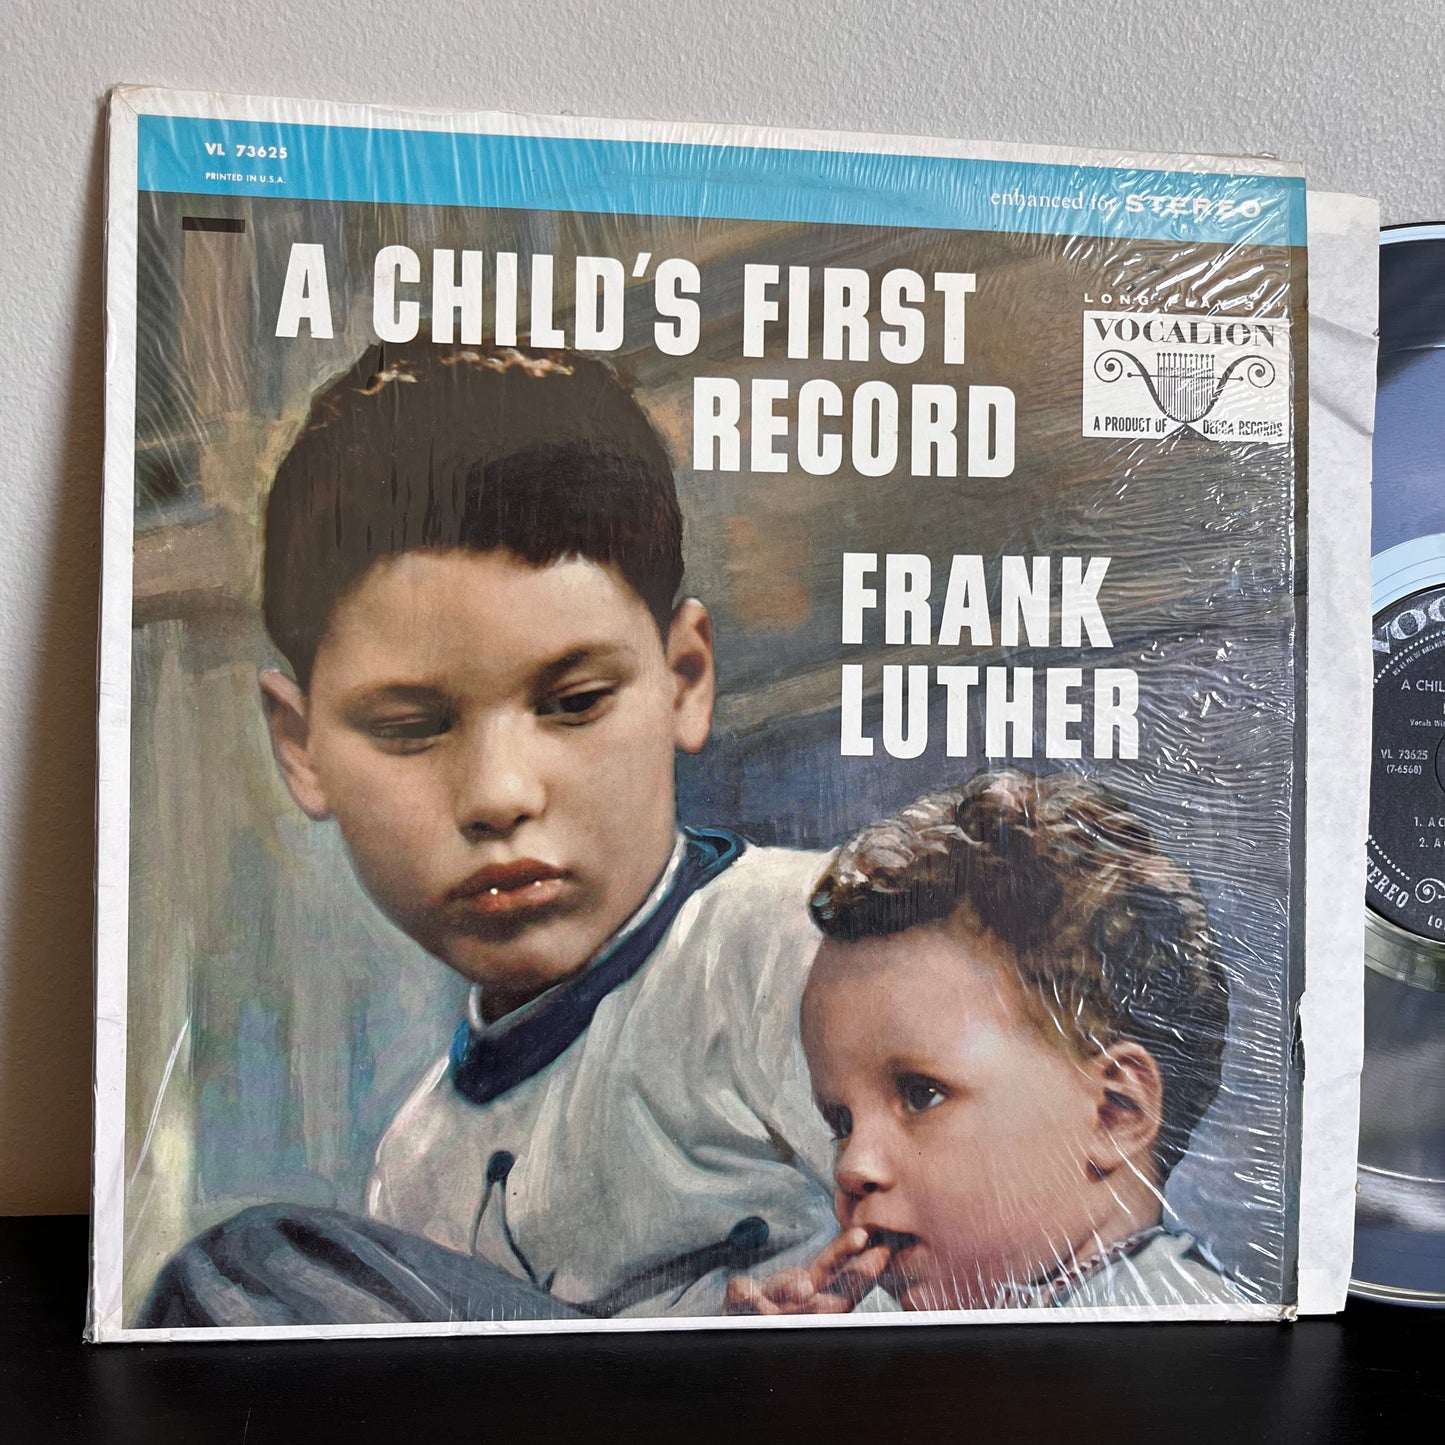 A Child's First Record - Frank Luther LP VL 73625 STEREO Used Vinyl NM